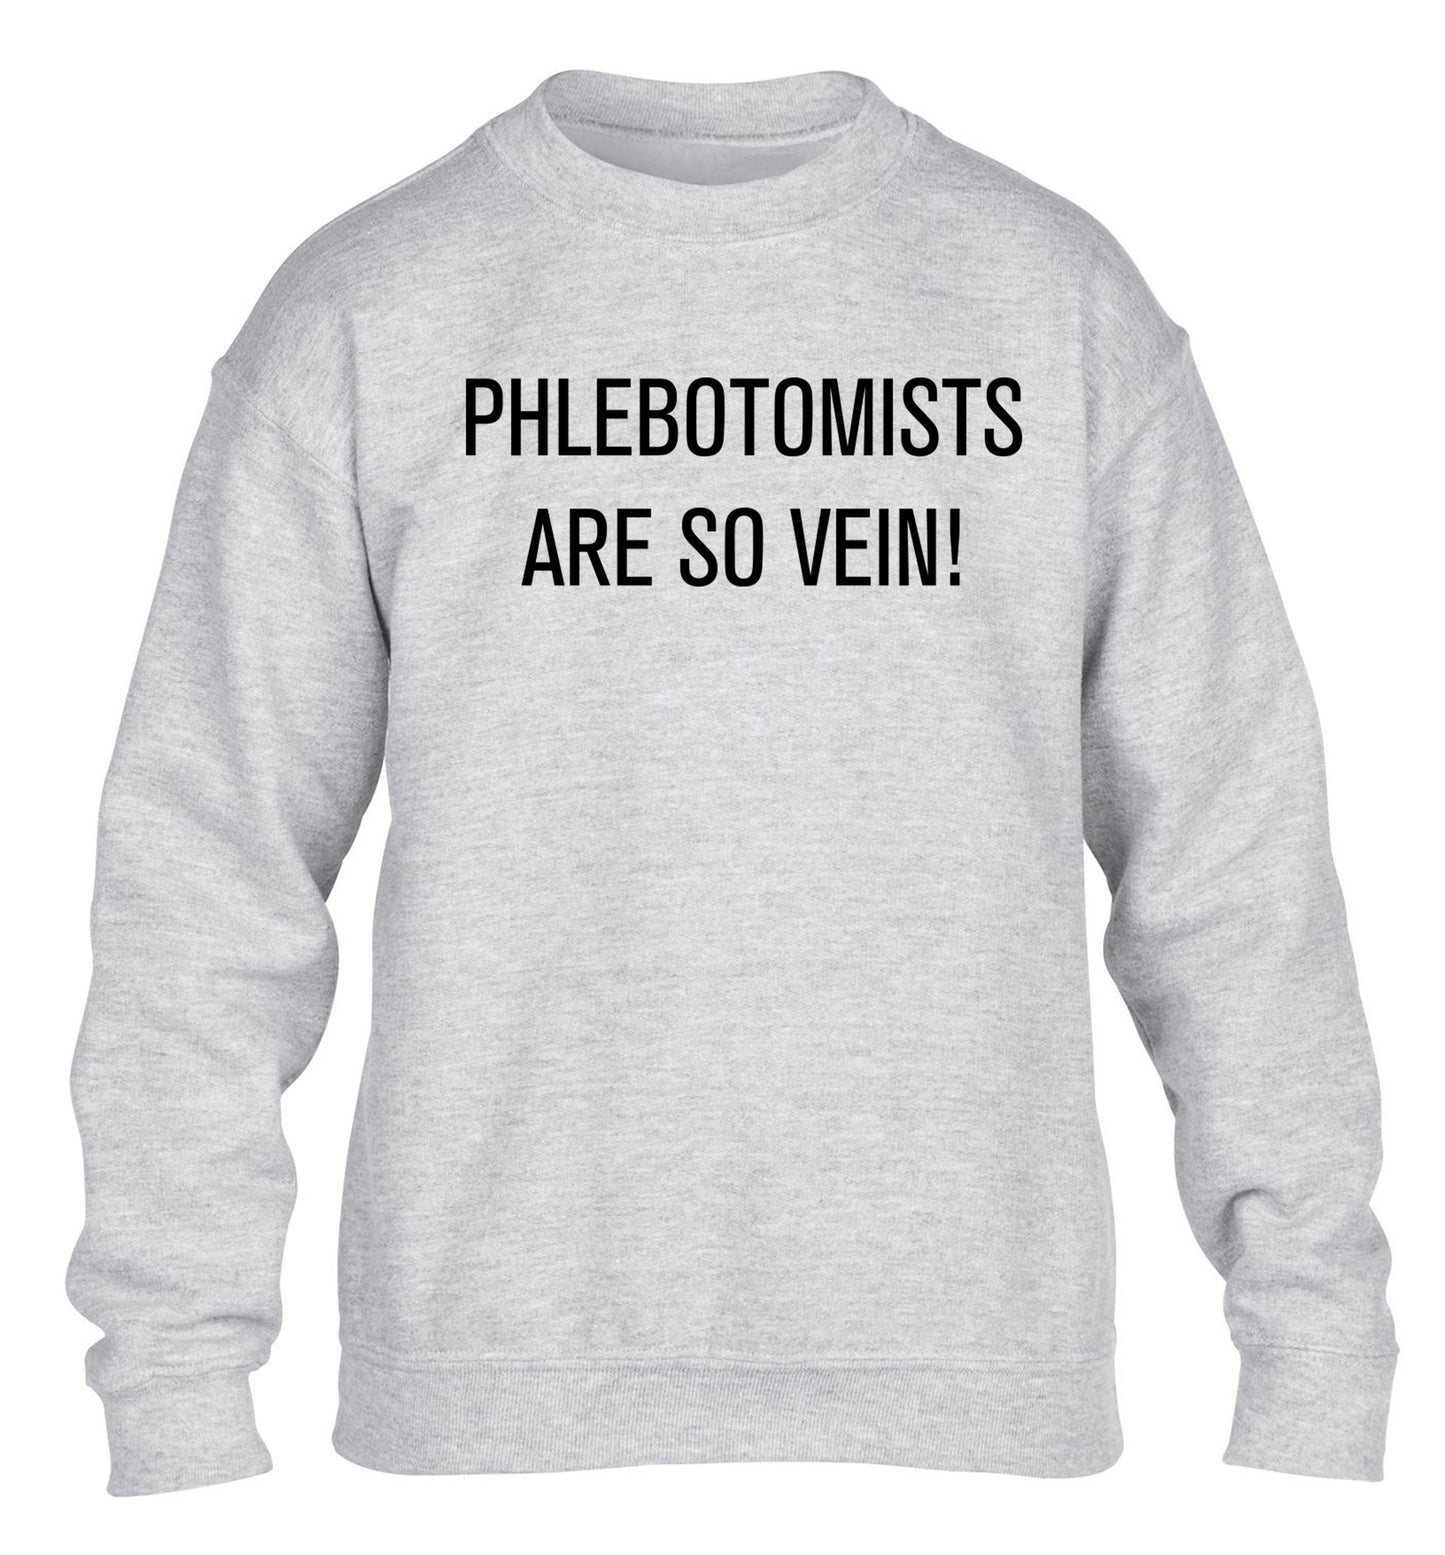 Phlebotomists are so vein! children's grey sweater 12-14 Years